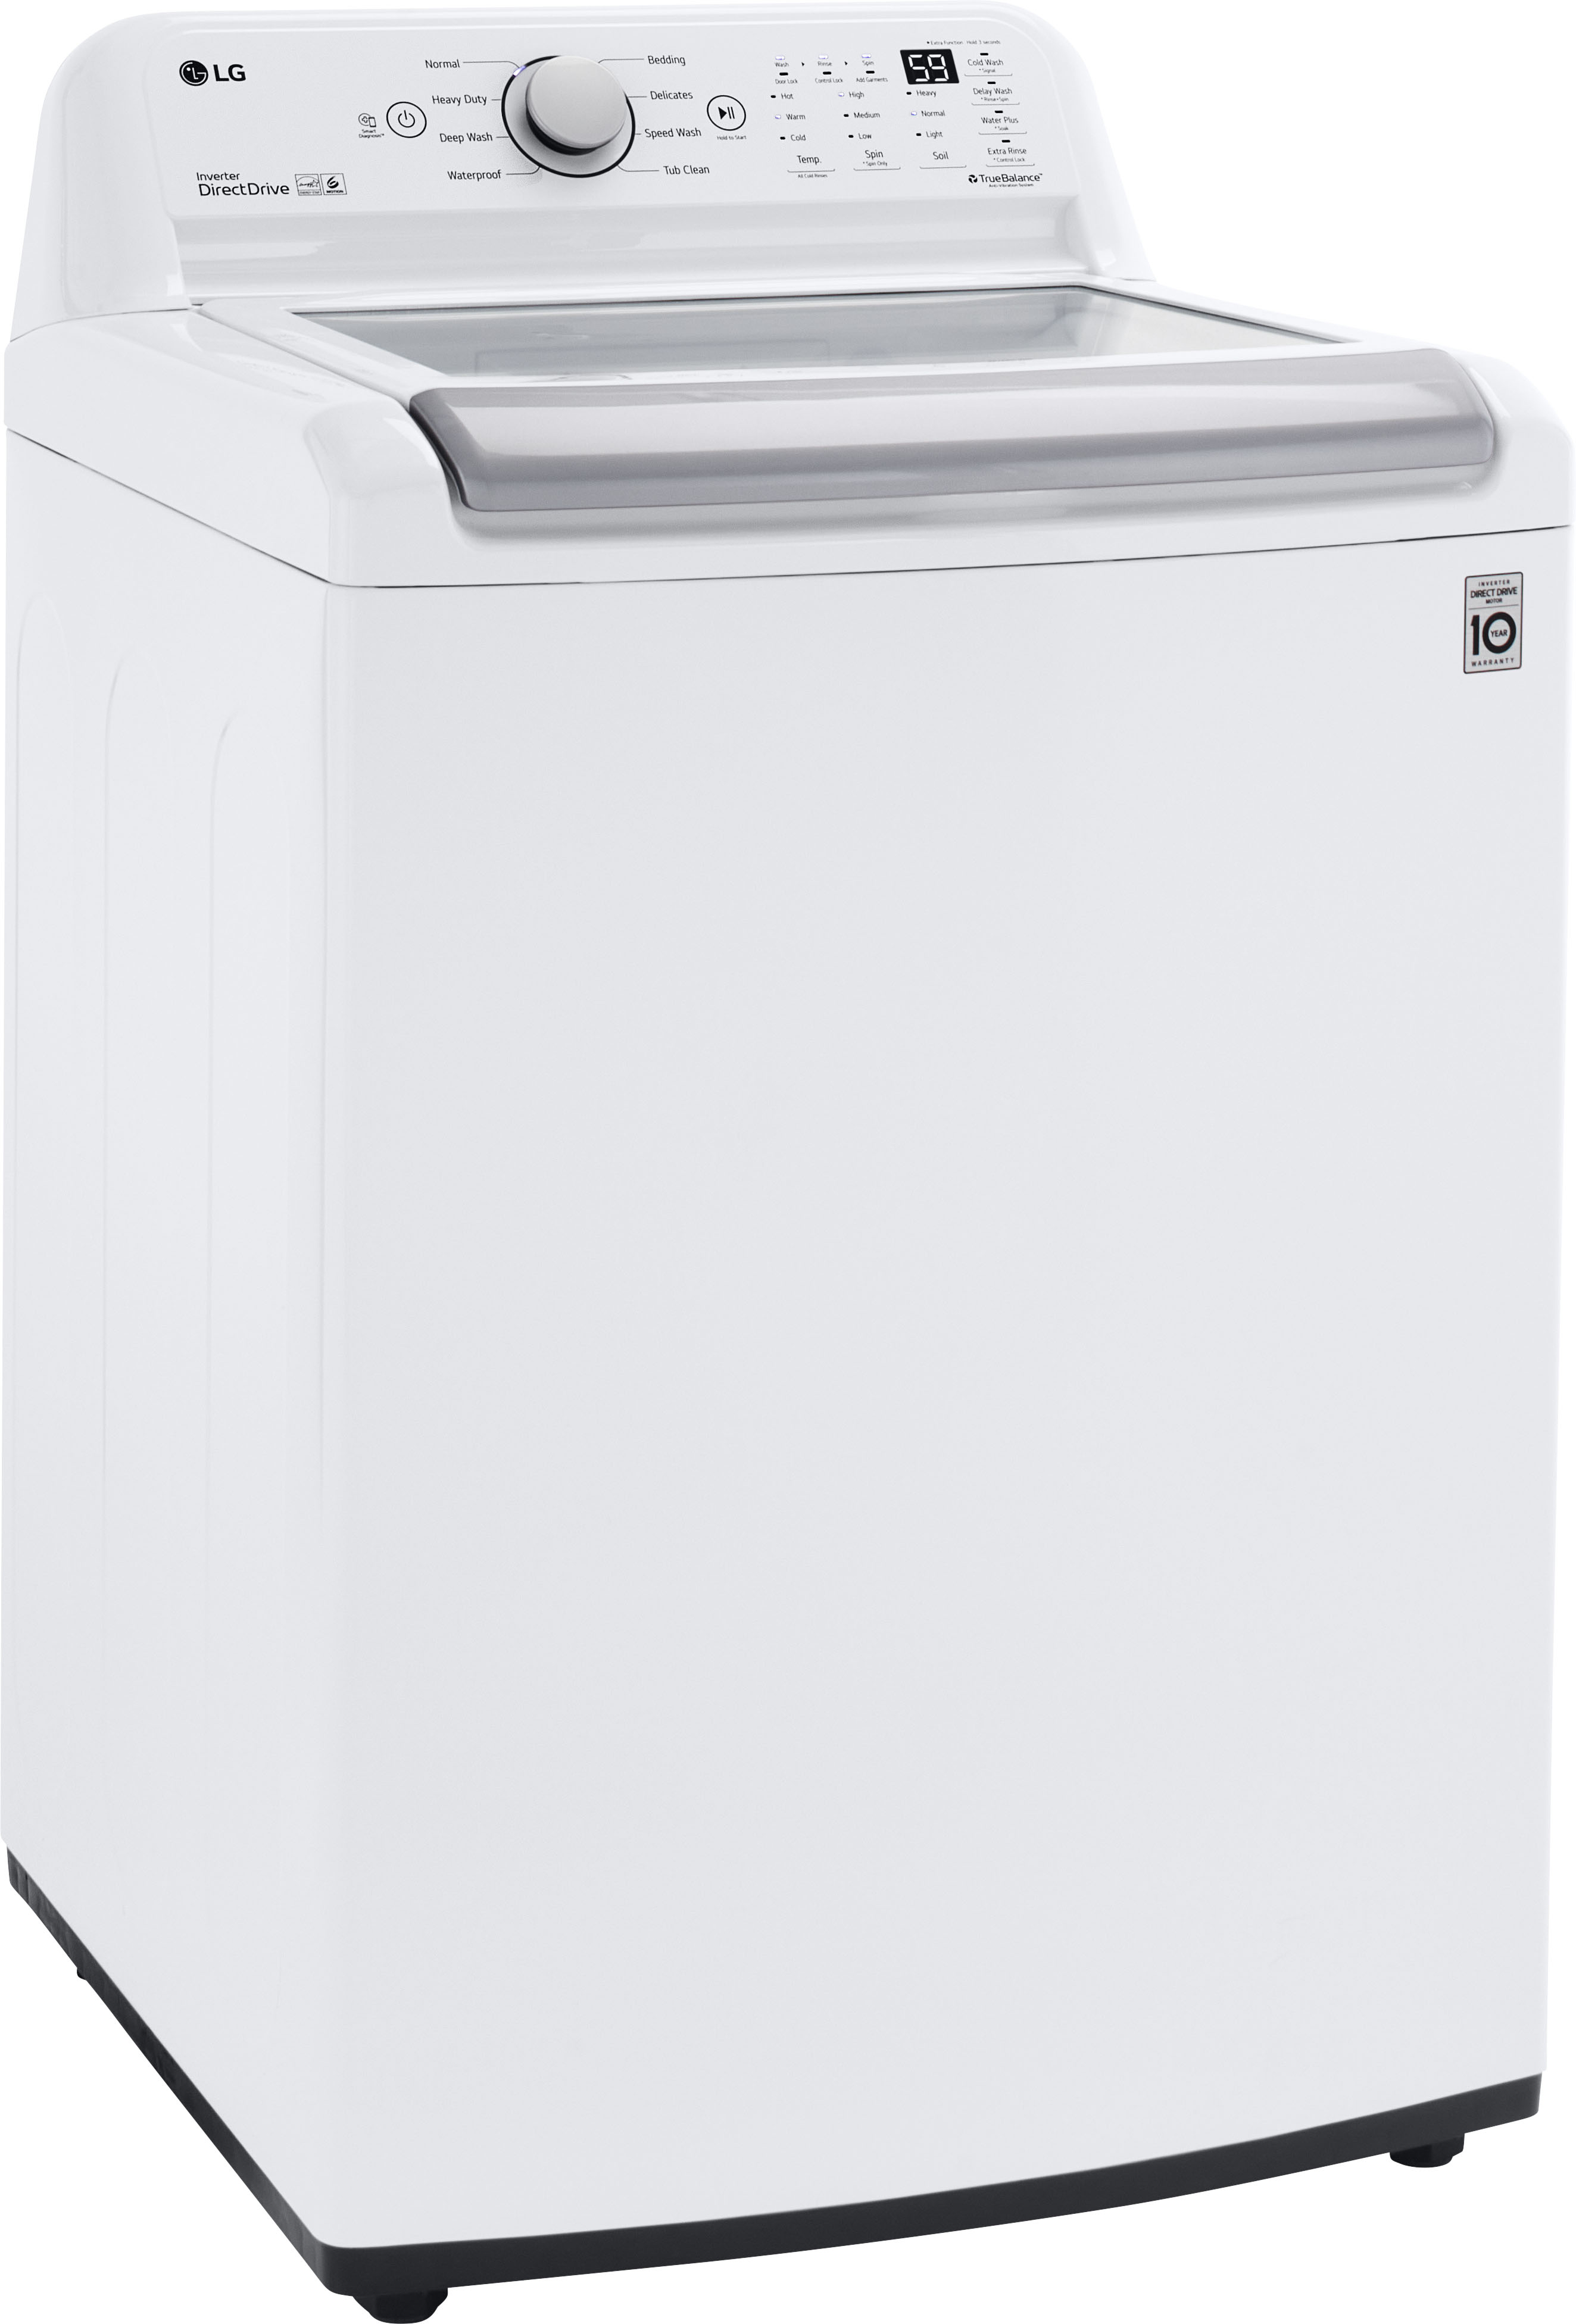 Angle View: Samsung - 5.1 cu. ft. Smart Top Load Washer with ActiveWave Agitator and Super Speed Wash - White